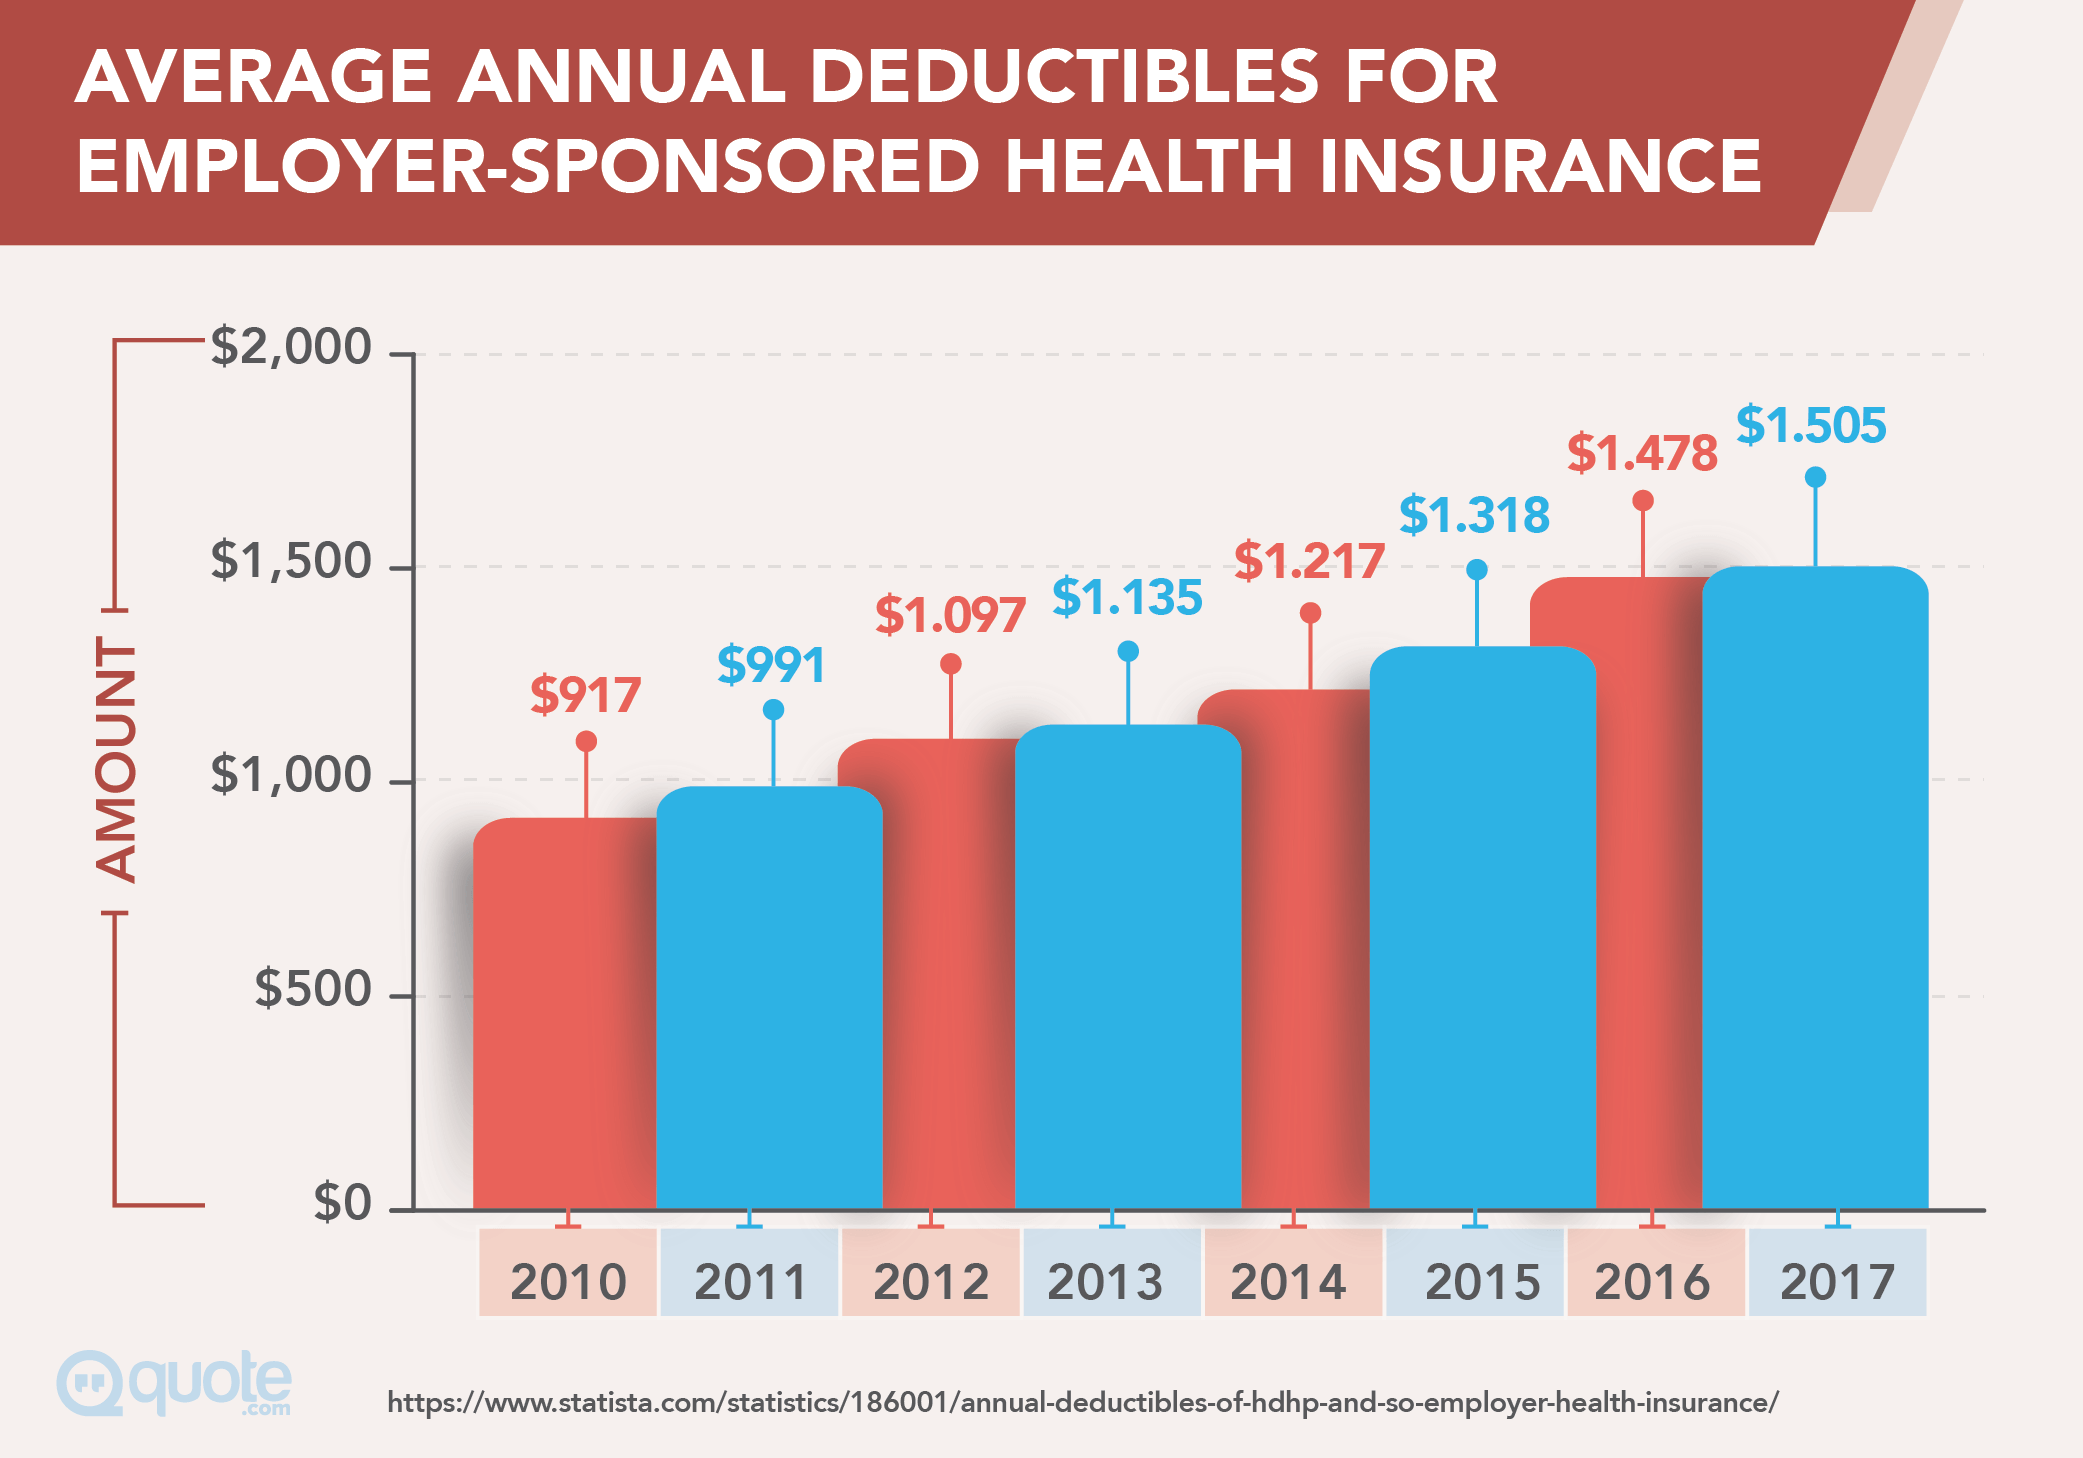 Average Annual Deductibles For Employer-Sponsored Health Insurance from 2010-2017